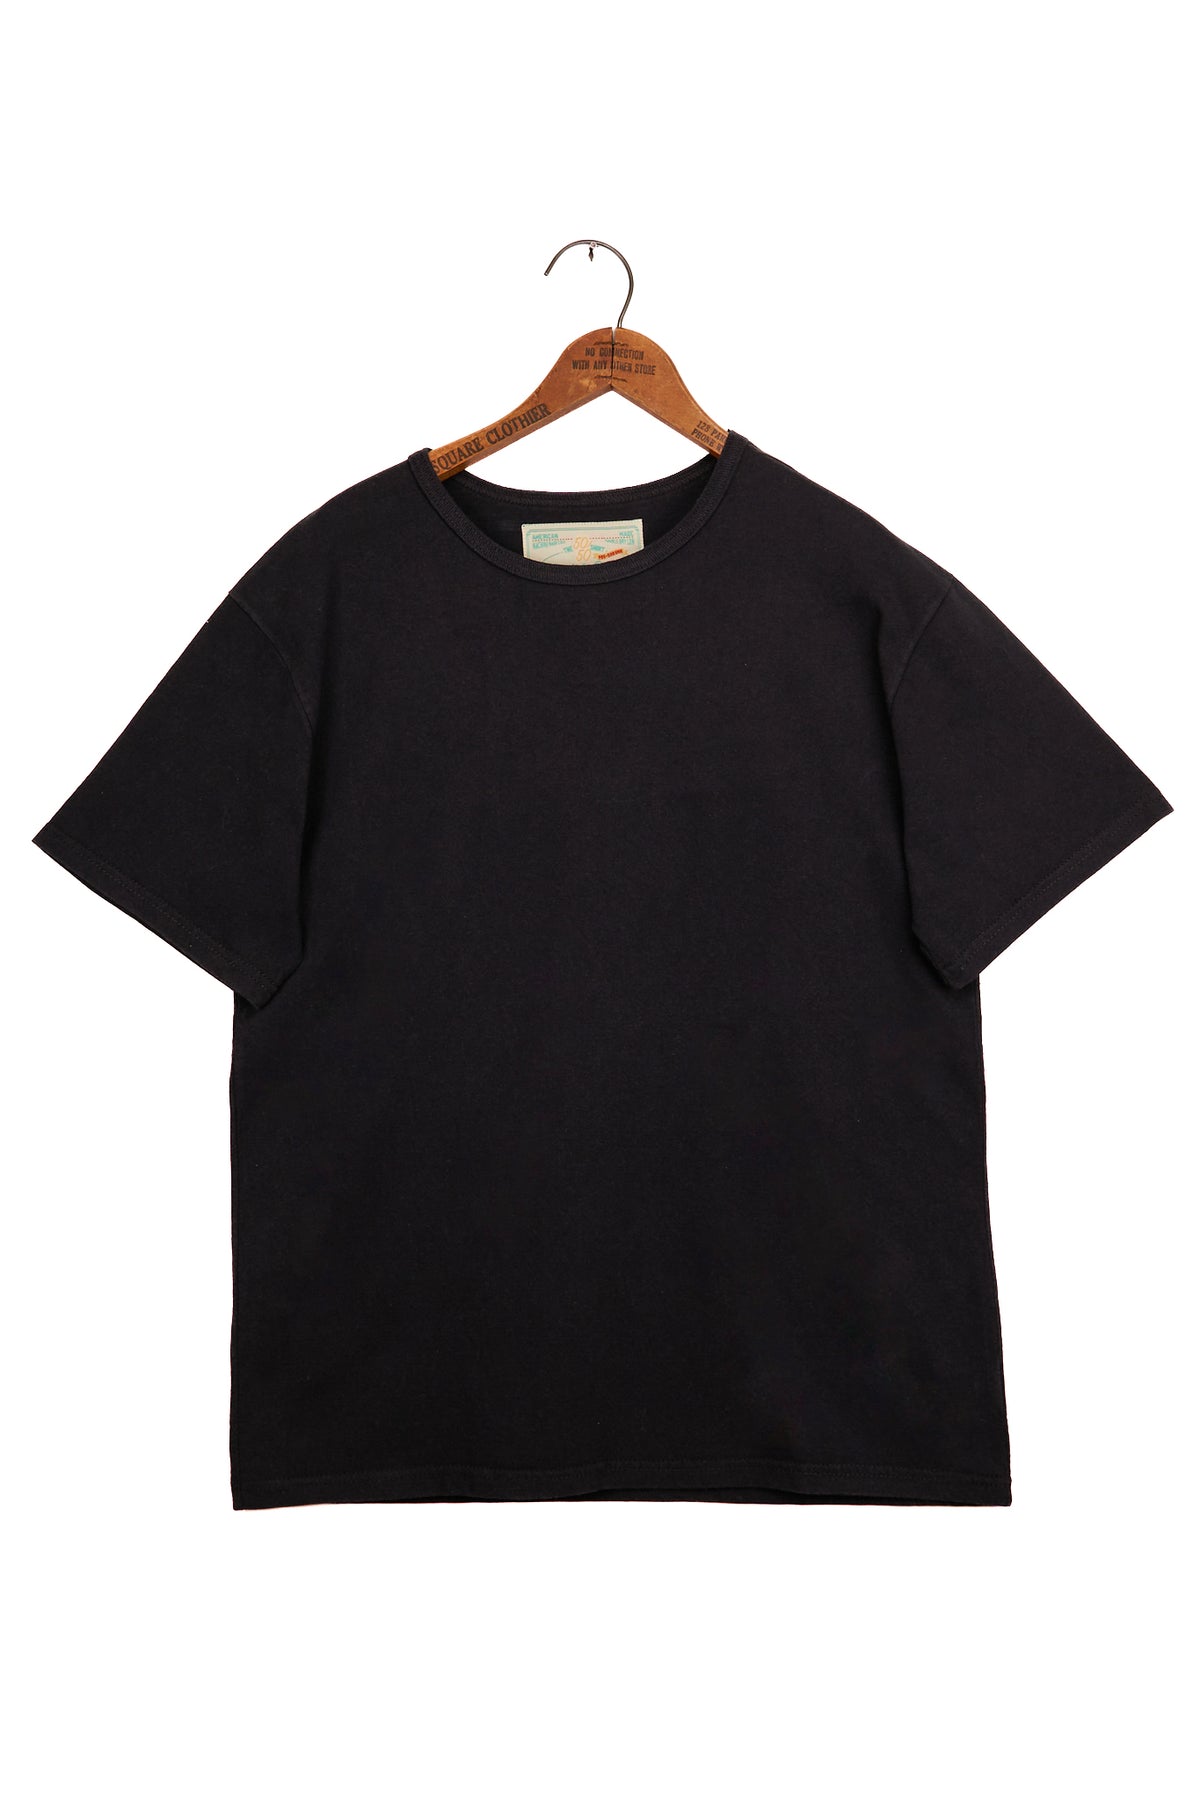 The 50/50 Shirt - CLASSIC TEE - Piece Dyed Black